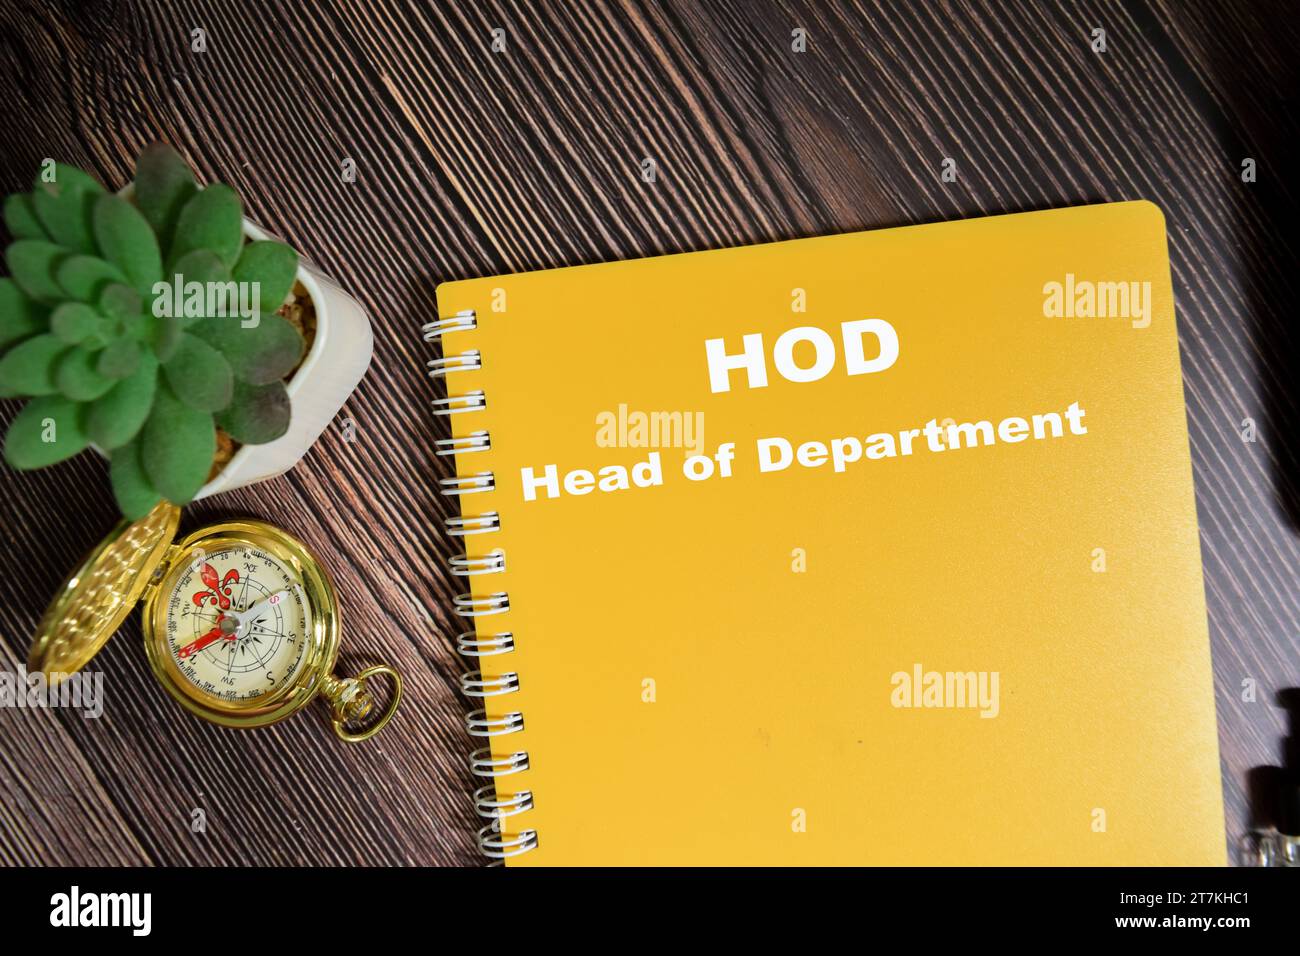 Concept of HOD - Head of Department write on book isolated on Wooden Table. Stock Photo